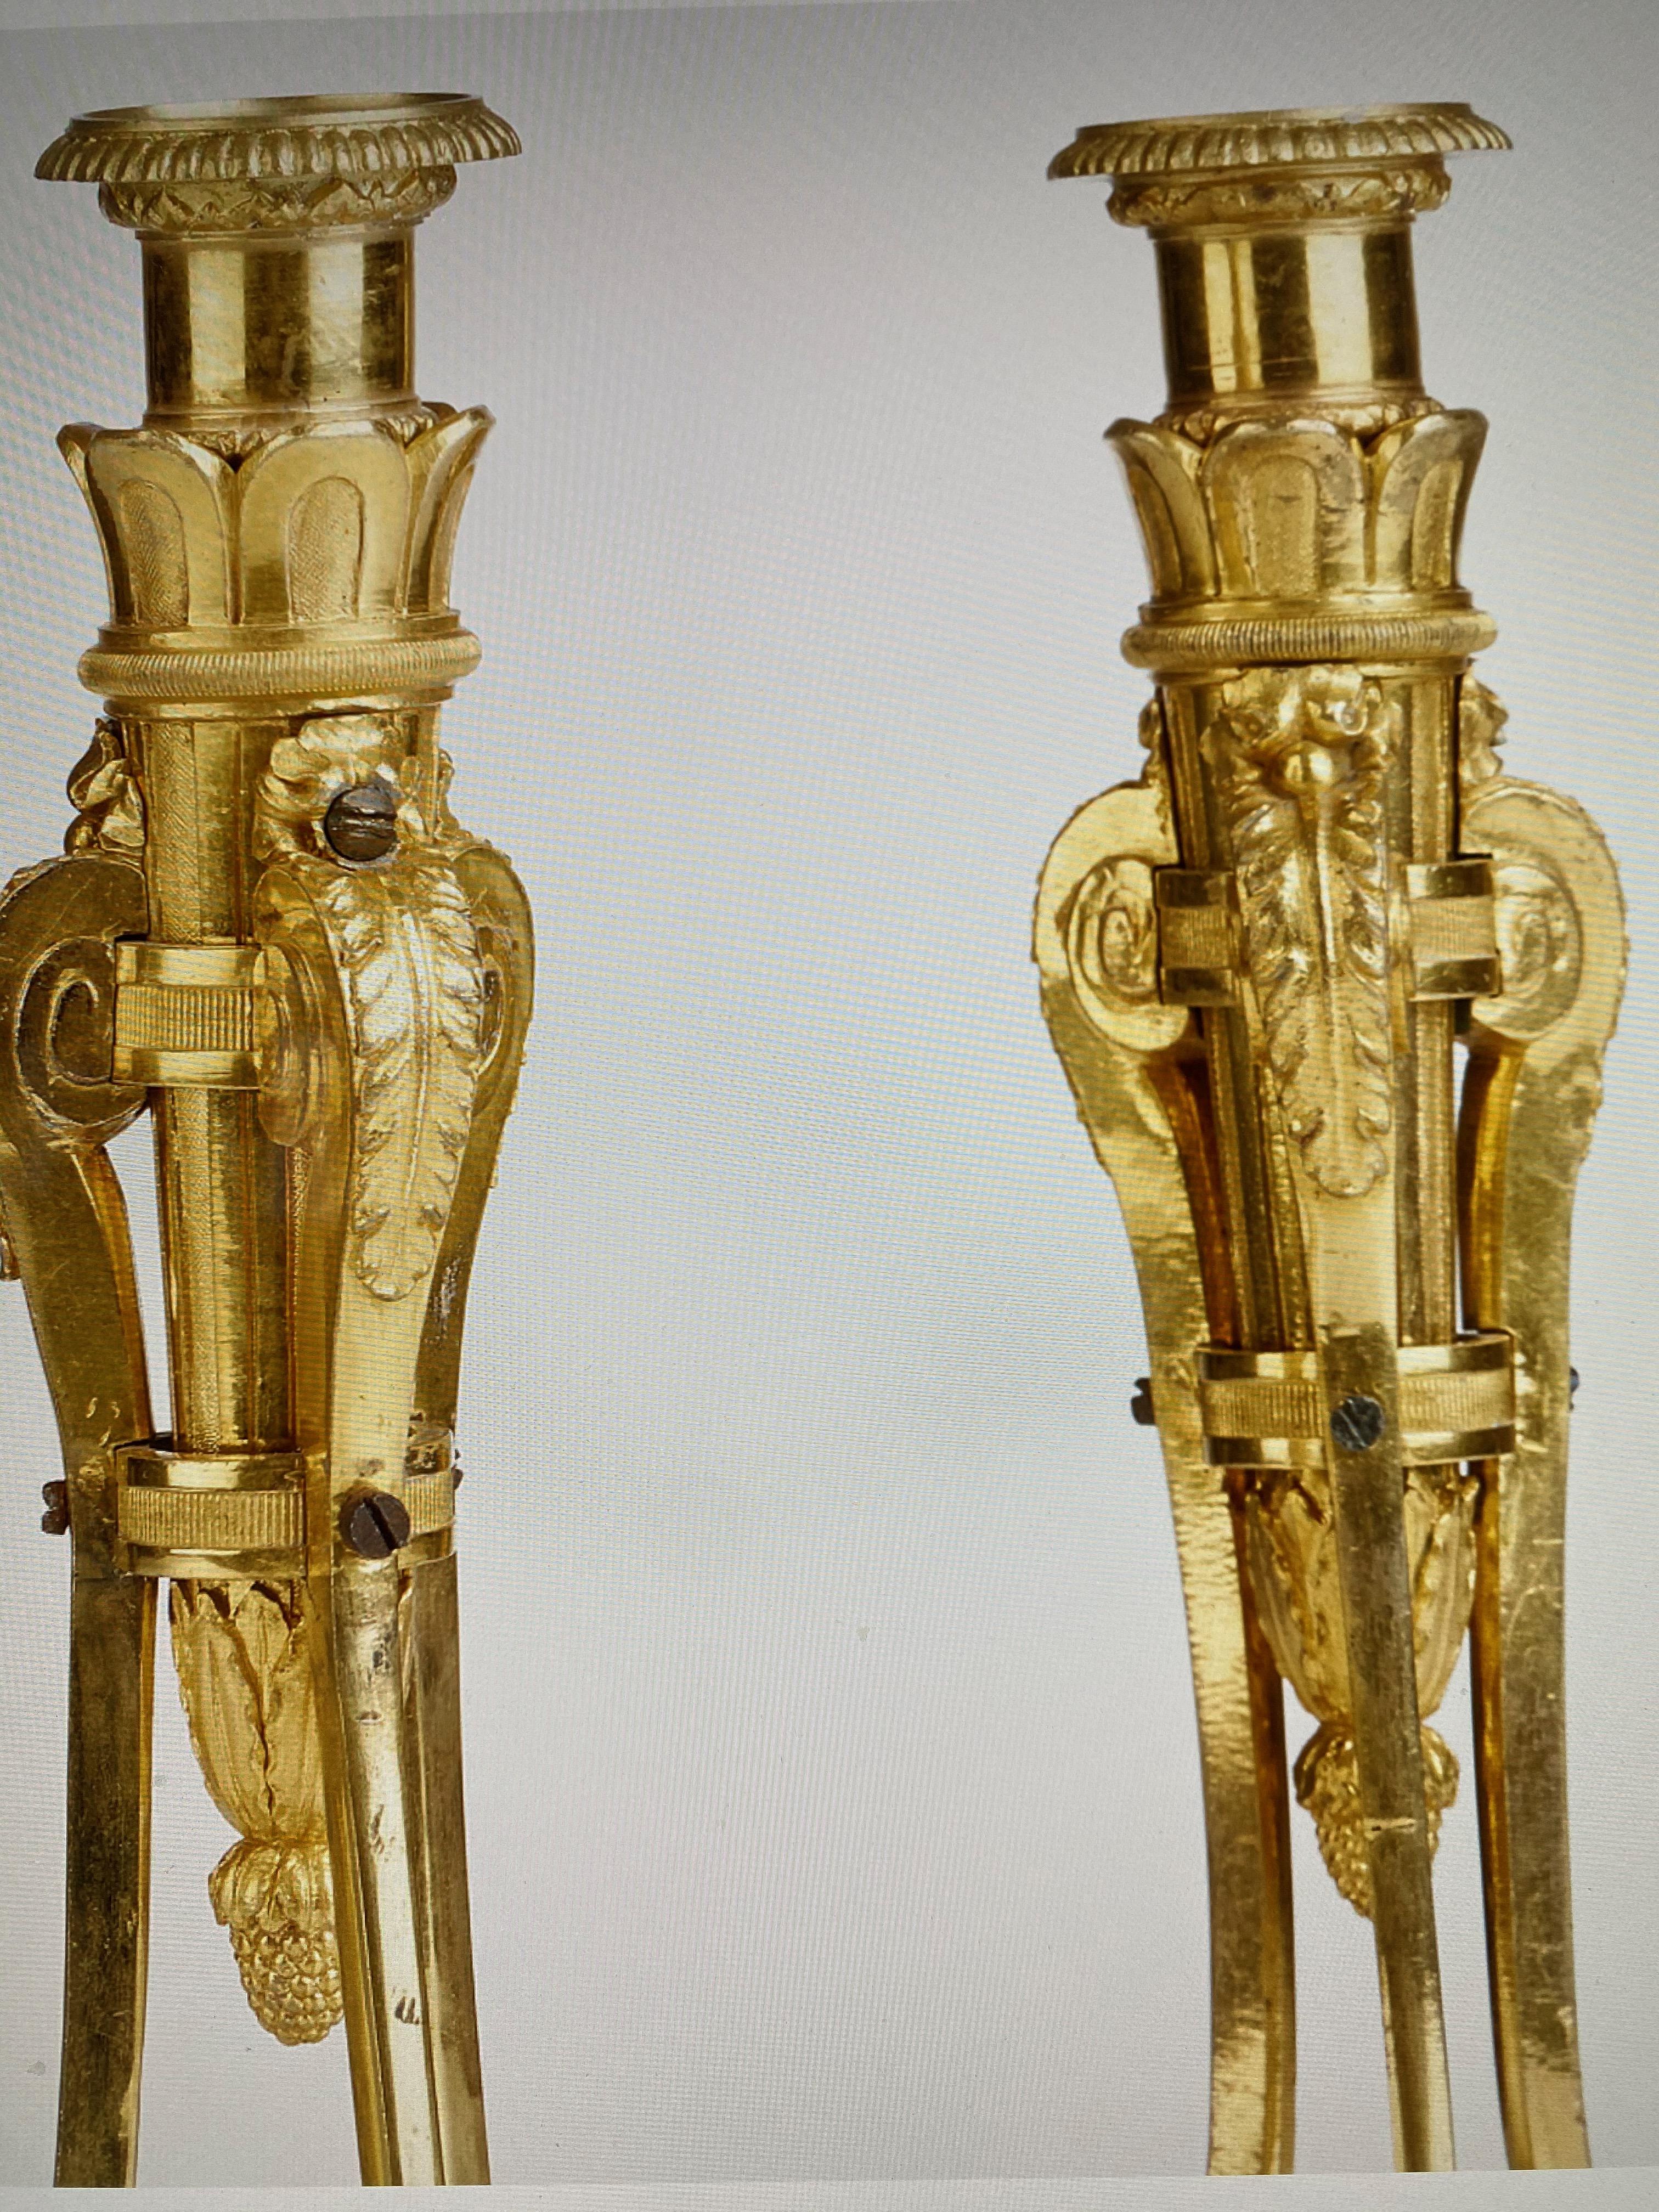 A pair of candlesticks of an unusual design. White marble and gilt bronce.